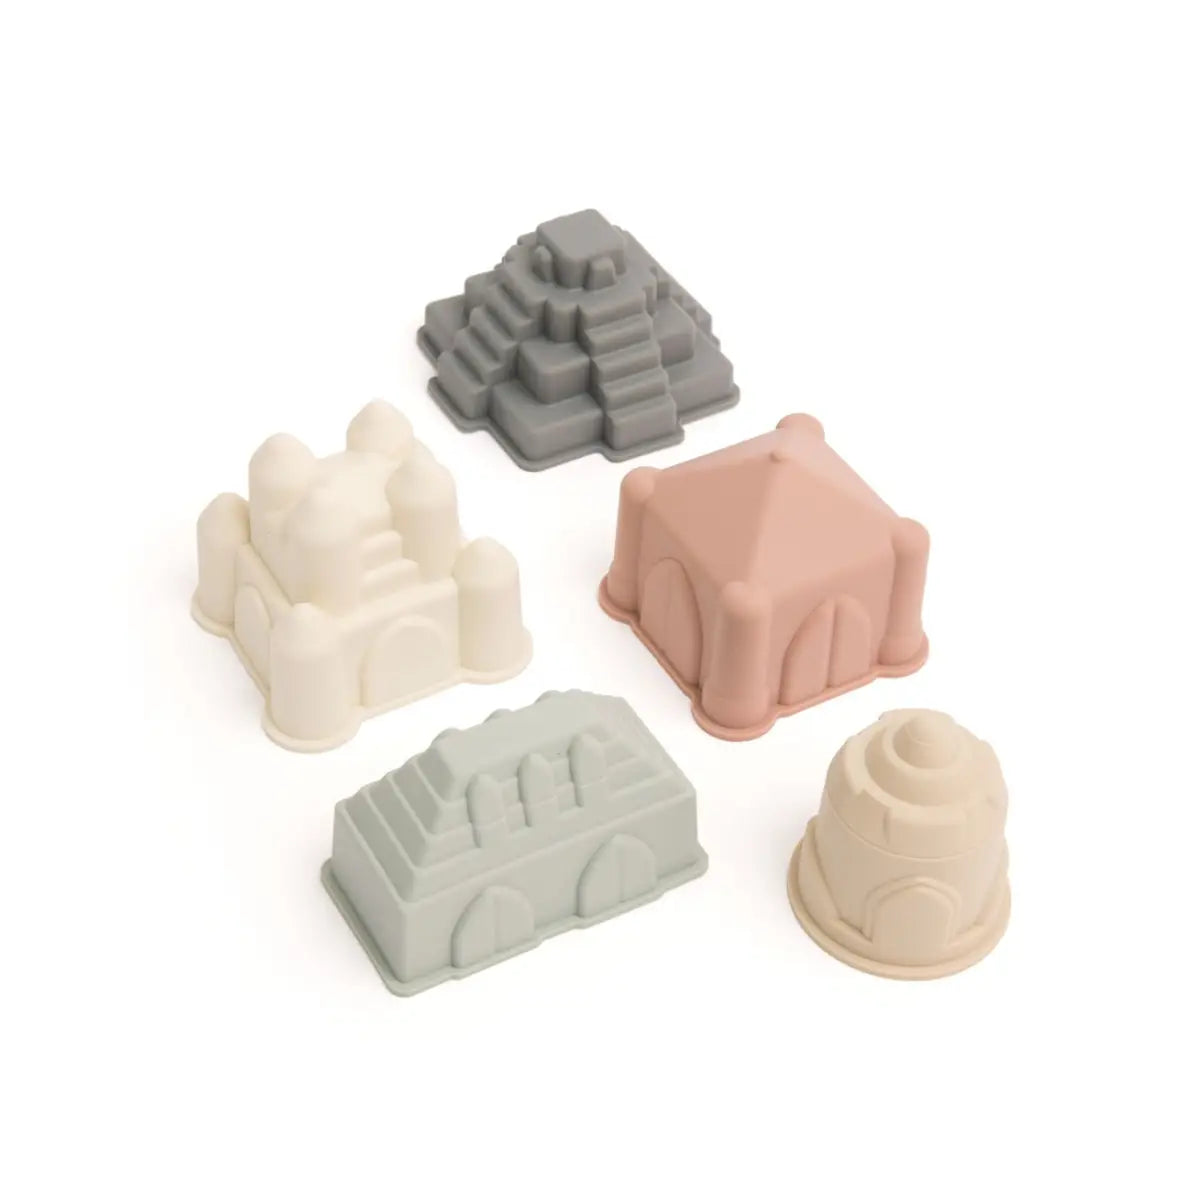 SILICONE BEACH SAND MOLD SETS, CASTLE BUILDING KIT